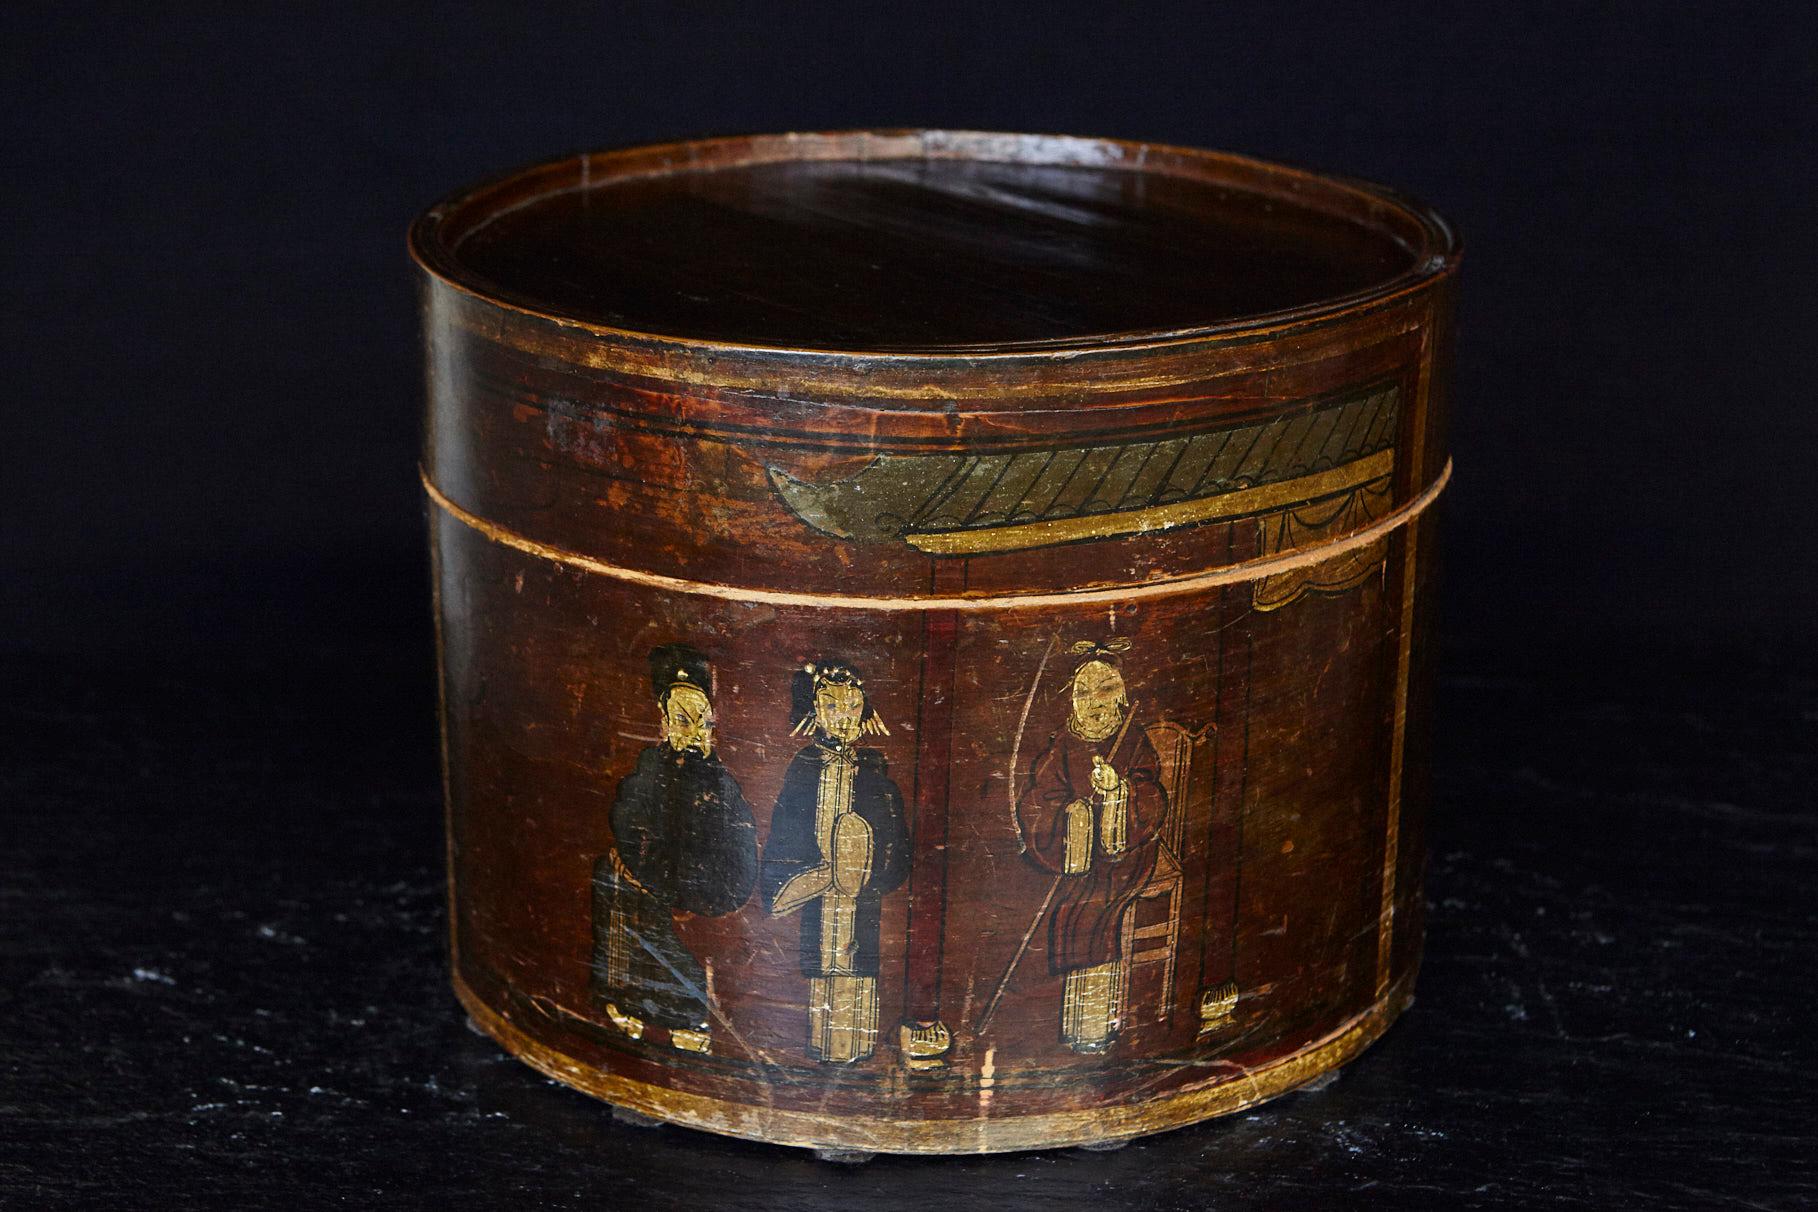 Very decorative late 19th century Chinese hand-painted and gilded round wooden hat box.
The (probably) elm wood box has been treated with a dark stain, then decorated with a hand painted scene with people and gilded edges. Fantastic piece with a